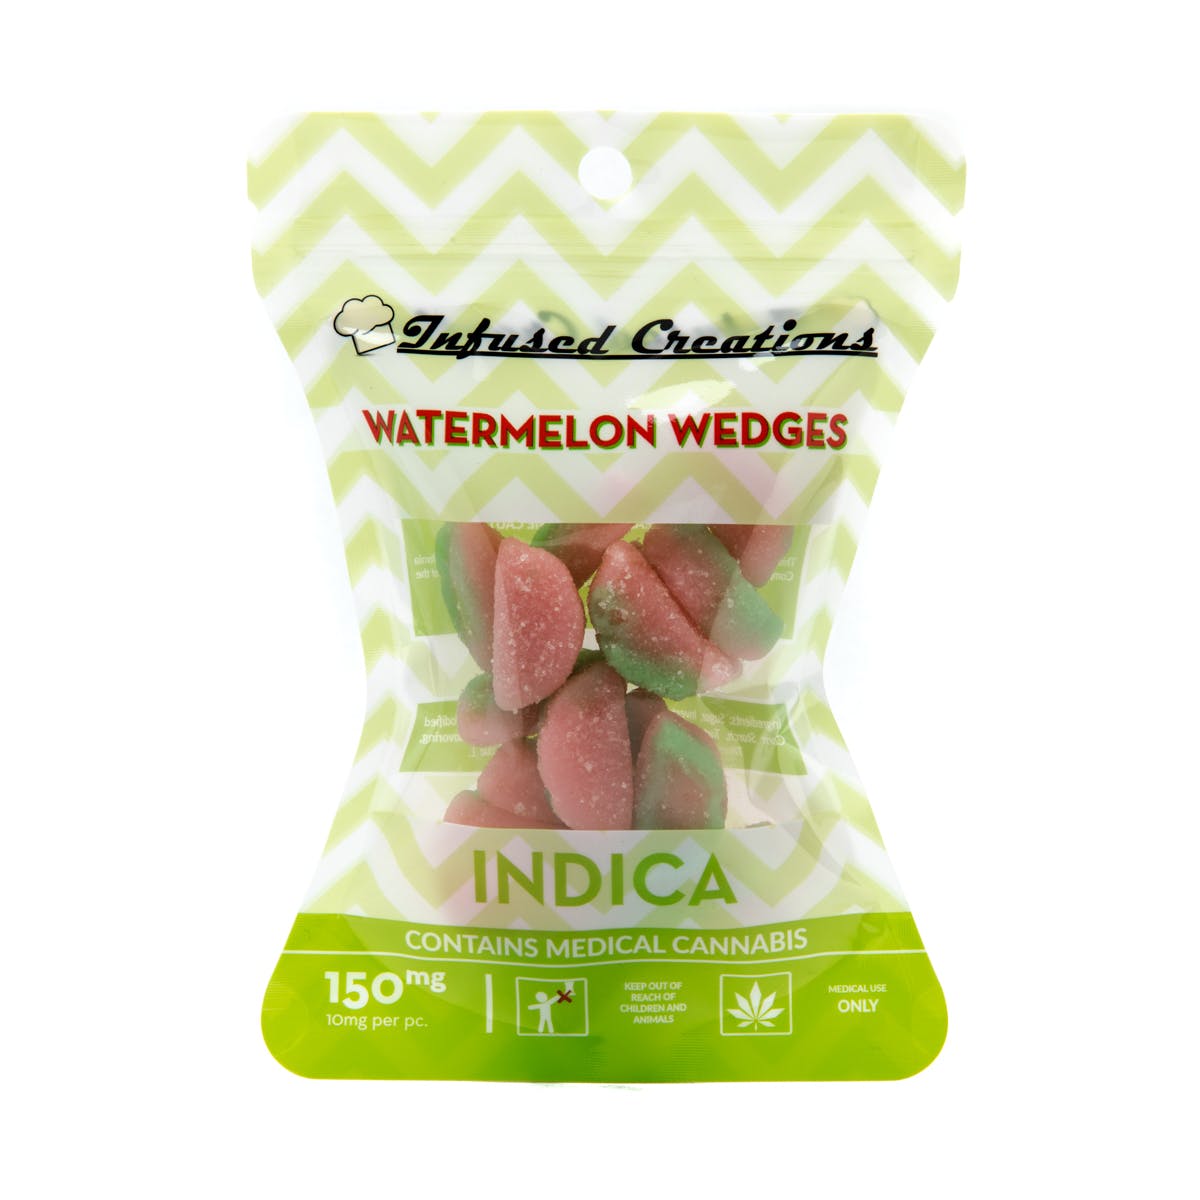 Watermelon Wedges Indica, 150mg